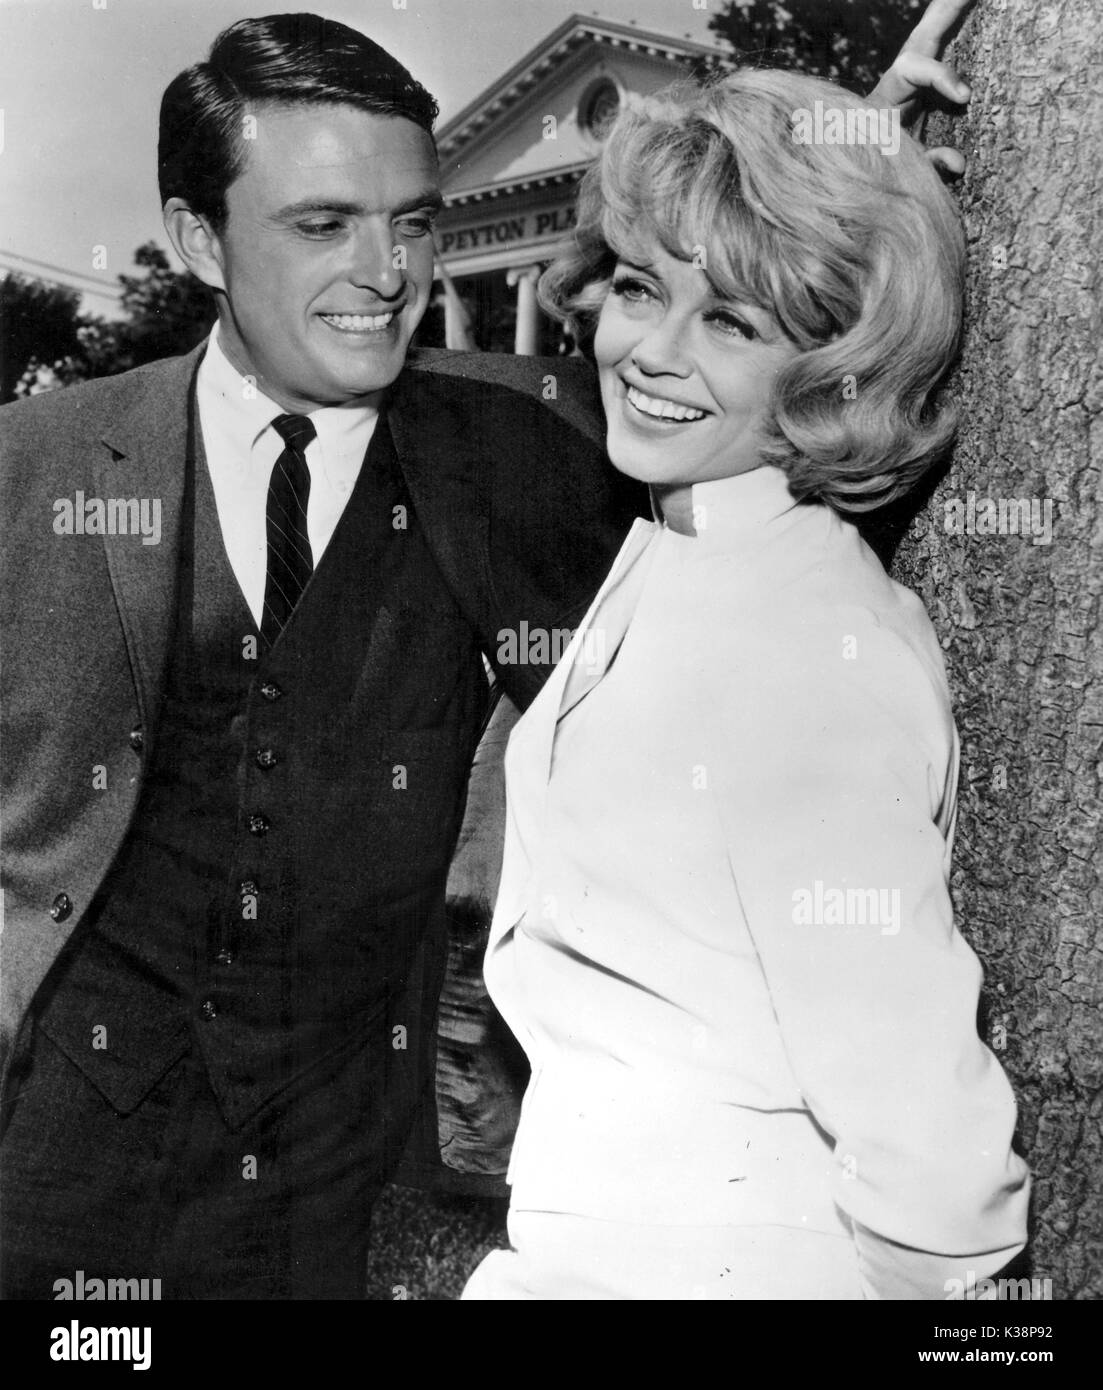 PEYTON PLACE ED NELSON, DOROTHY MALONE Banque D'Images